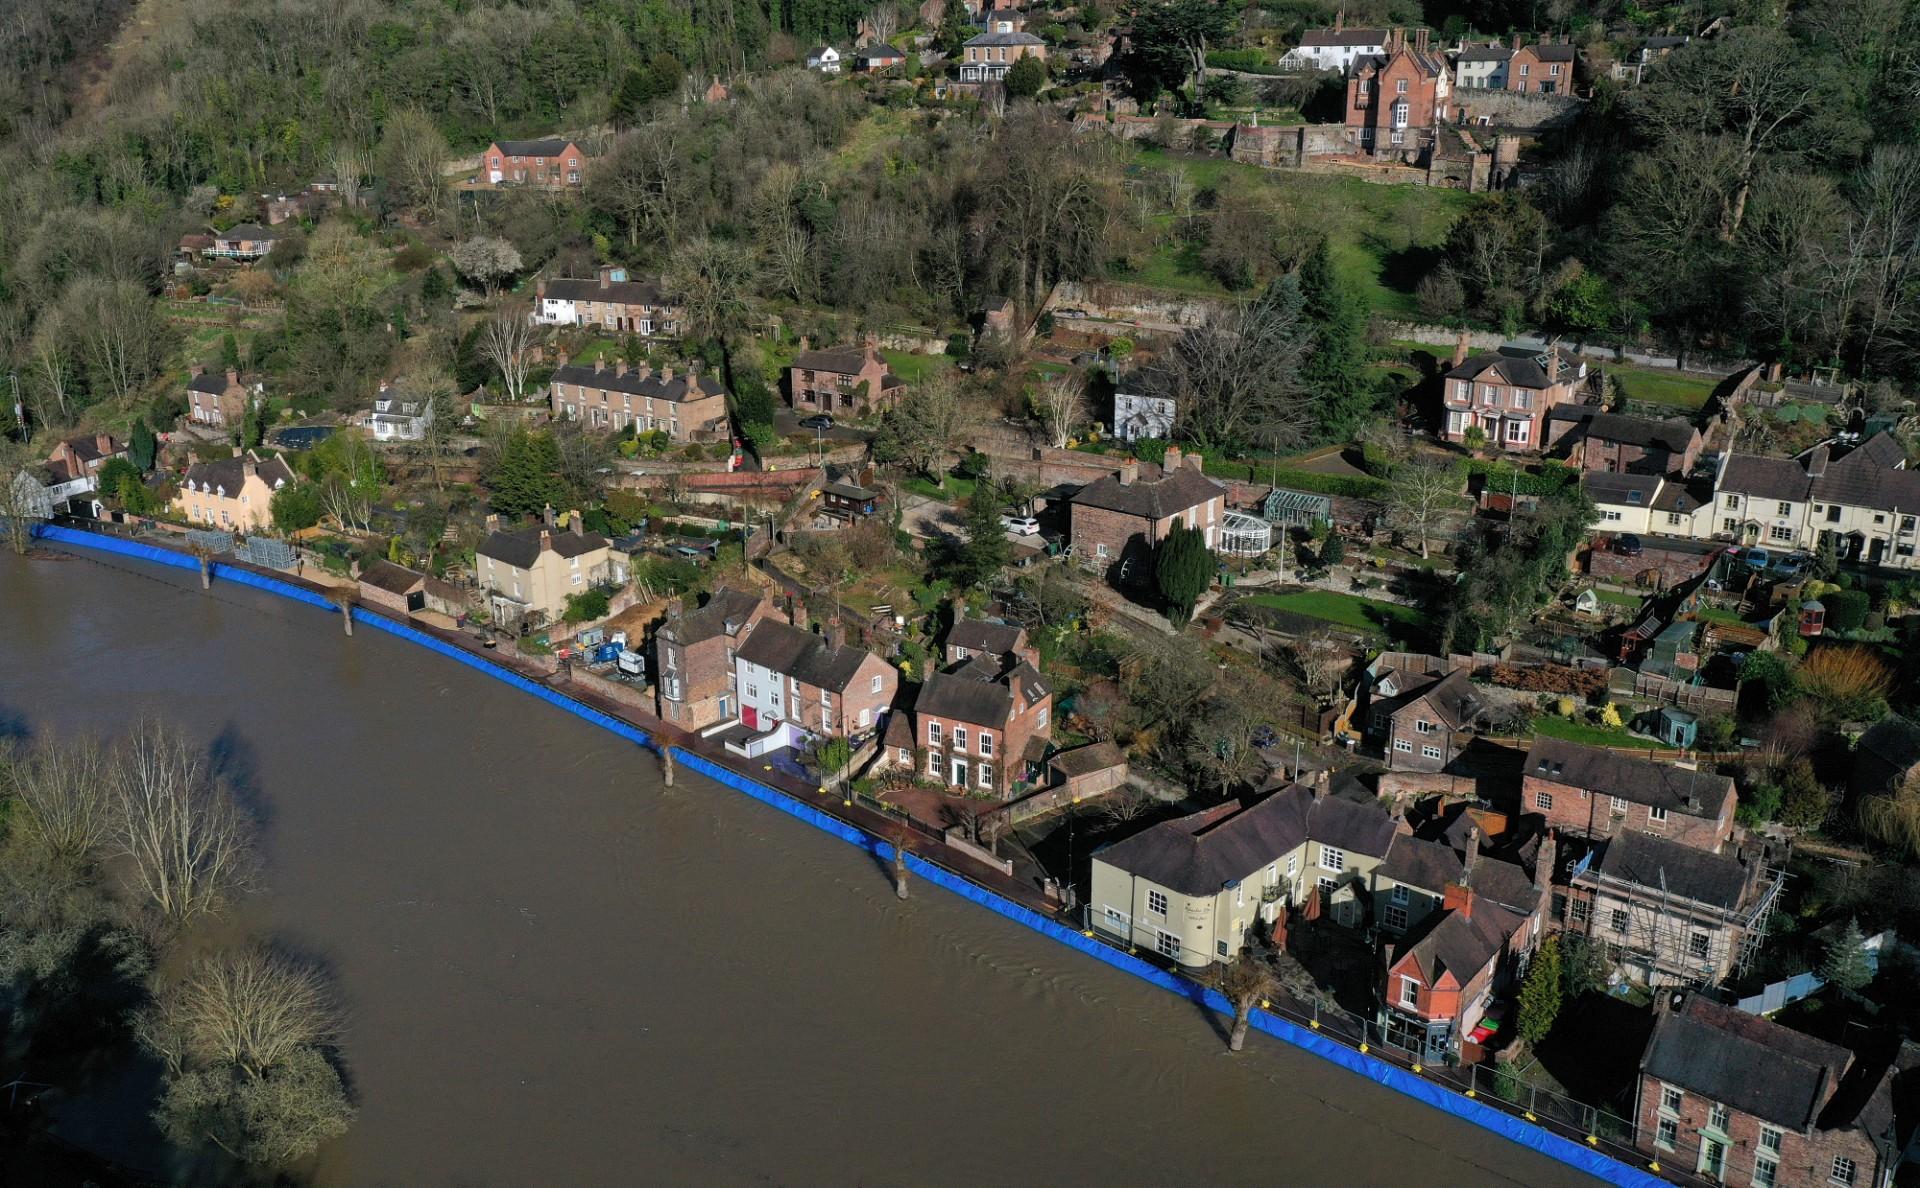 An aerial view shows temporary flood defences, to protect homes and businesses, along the burst banks of the River Severn after the river burst its banks in Ironbridge, central England, on Feb 22. Britain will pay people US$456 a month if they can offer refugees a spare room or property for a minimum period of six months. Photo: AFP